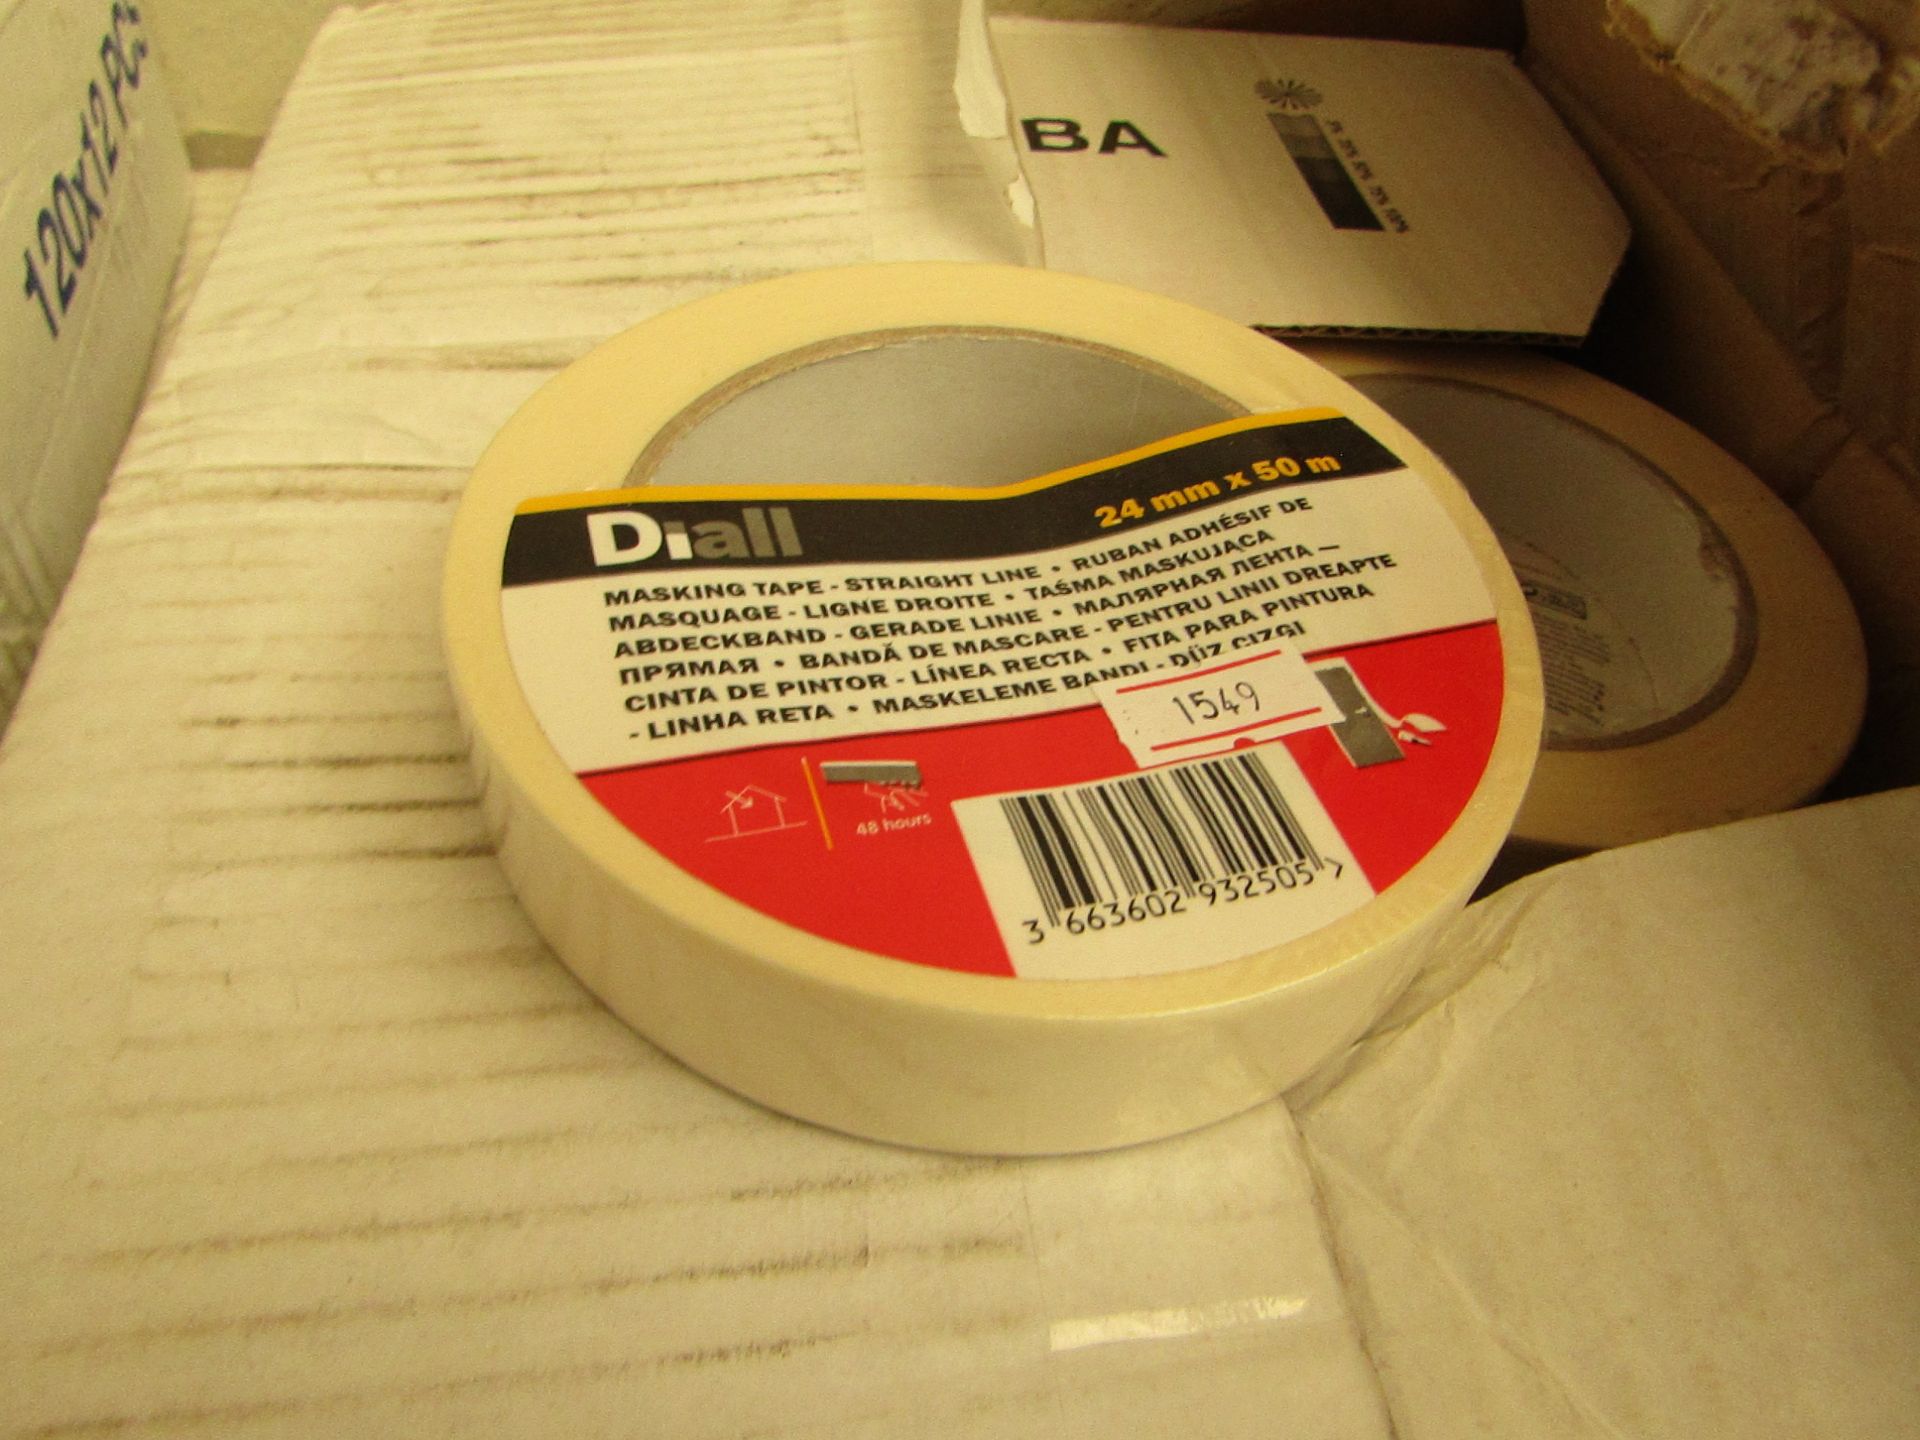 2x Diall Masking Tape, 24mm x 50m, New and Packaged